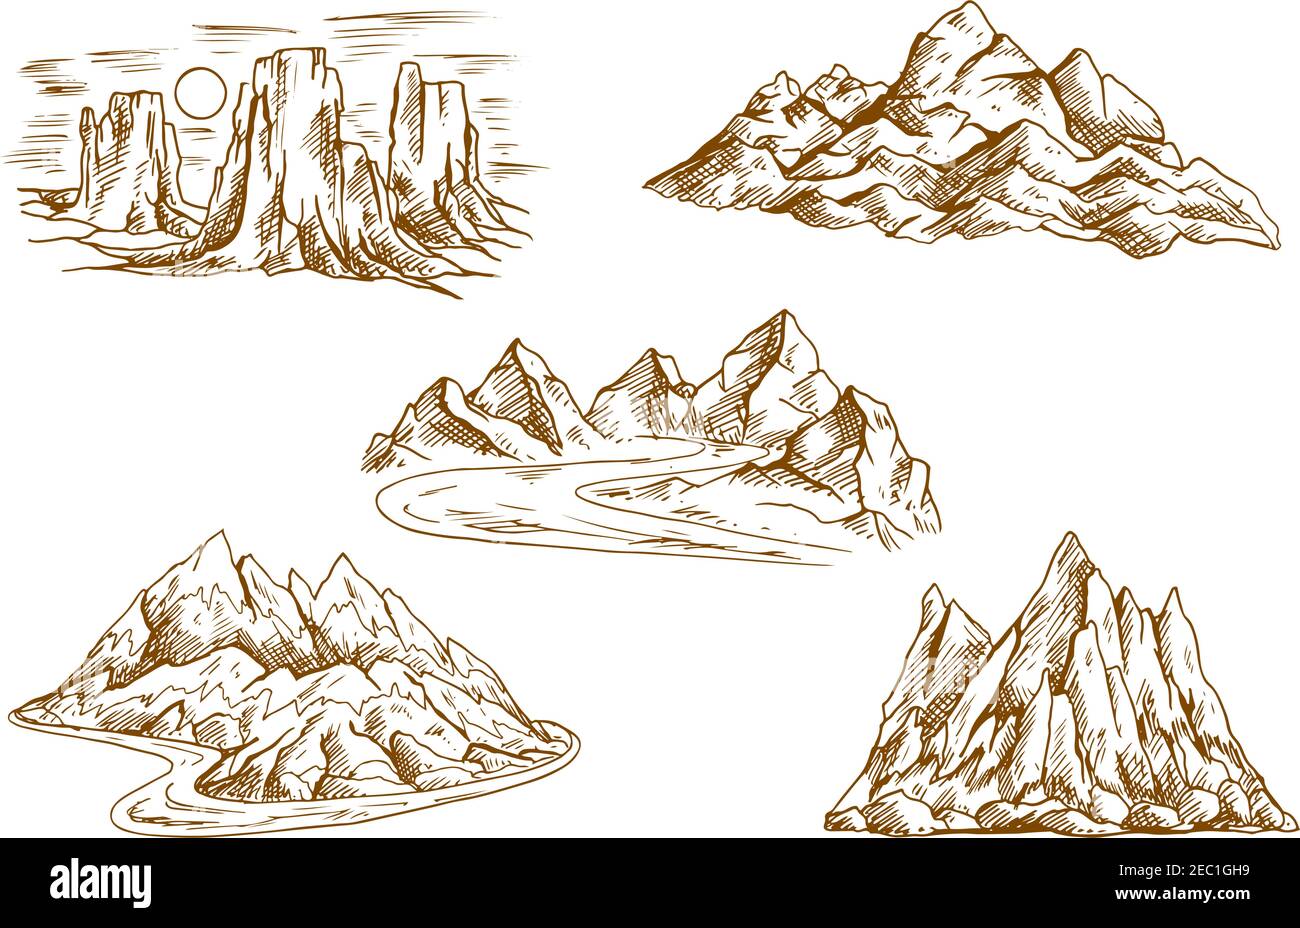 Retro sketched mountains icons with landscapes of high cliffs and hills, rocky ridge and summit, tower rocks and mountain valleys with winding roads. Stock Vector